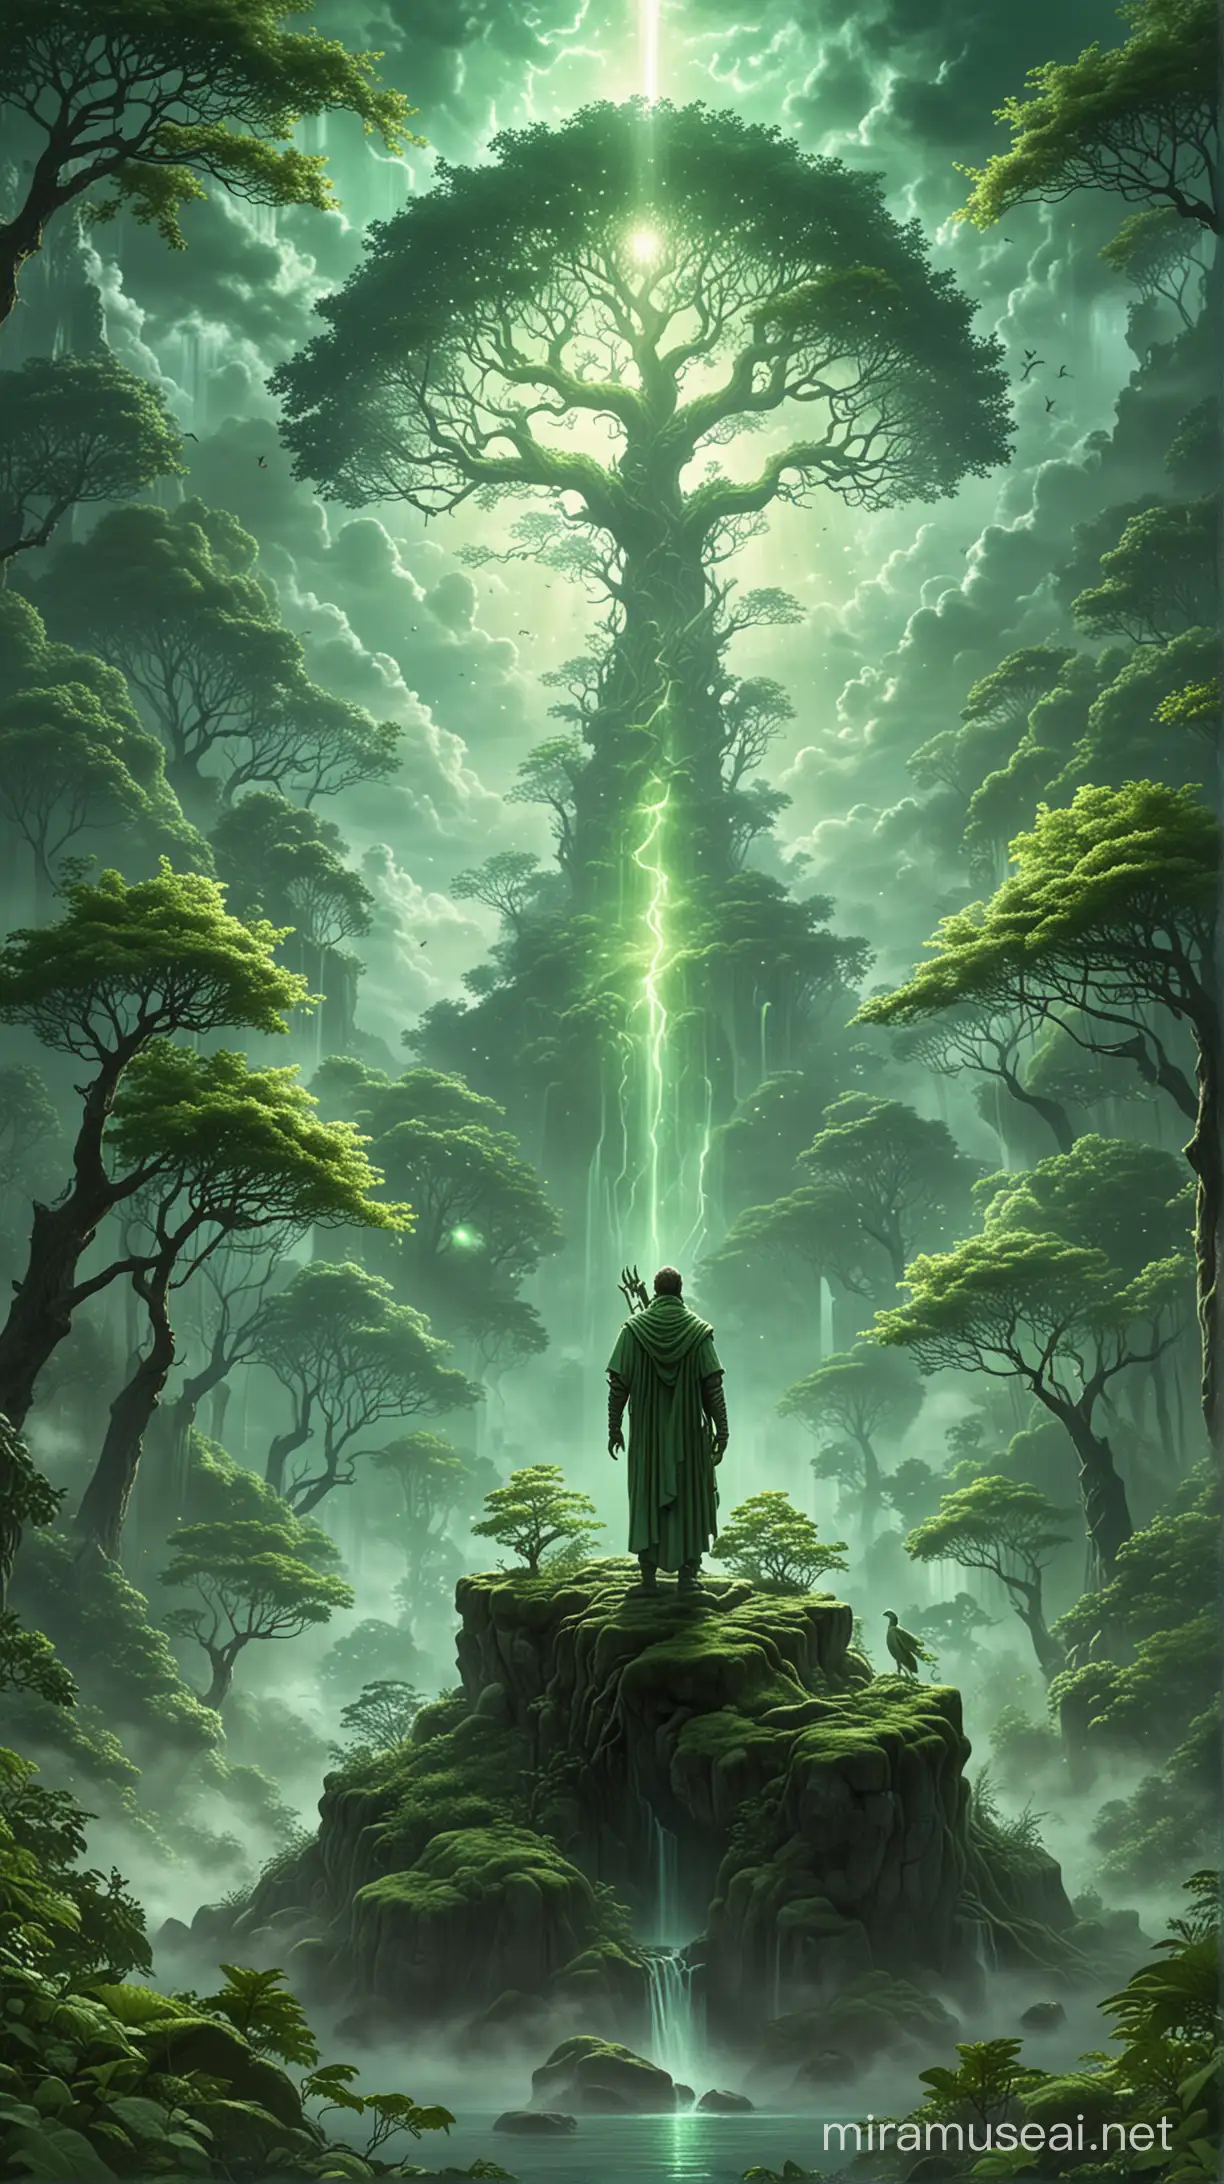 Fantasy Forest Guardian The God of Life in Mythical Green Themed Realm